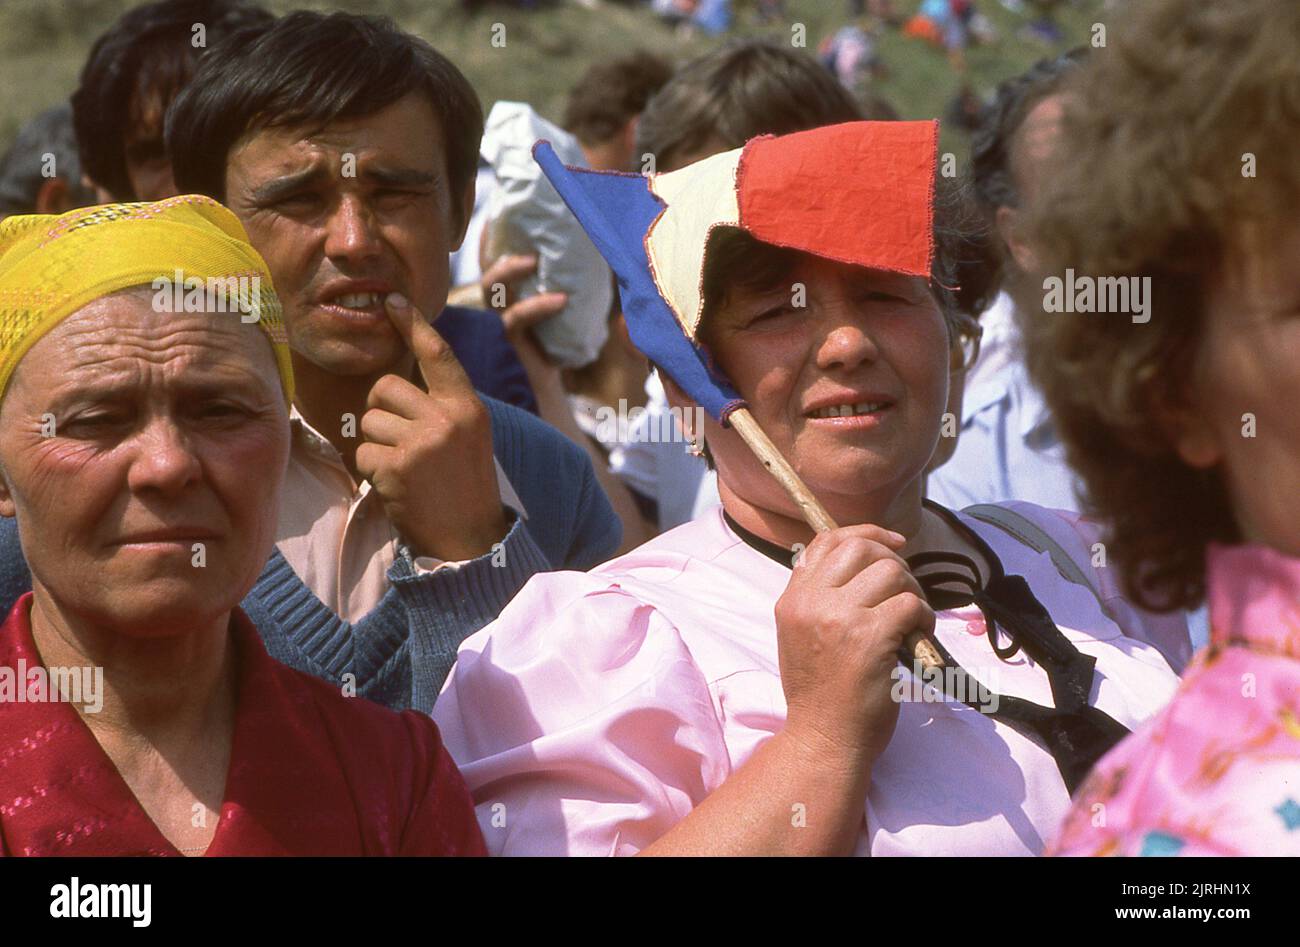 May 6, 1990, Botosani County, Romania. The Bridge of Flowers (Podul de Flori) event along the Prut River, that separated Romania and the Moldavian Socialist Republic. People were allowed for the first time since WWII to cross the border to their 'brothers' without a passport or visa. Stock Photo